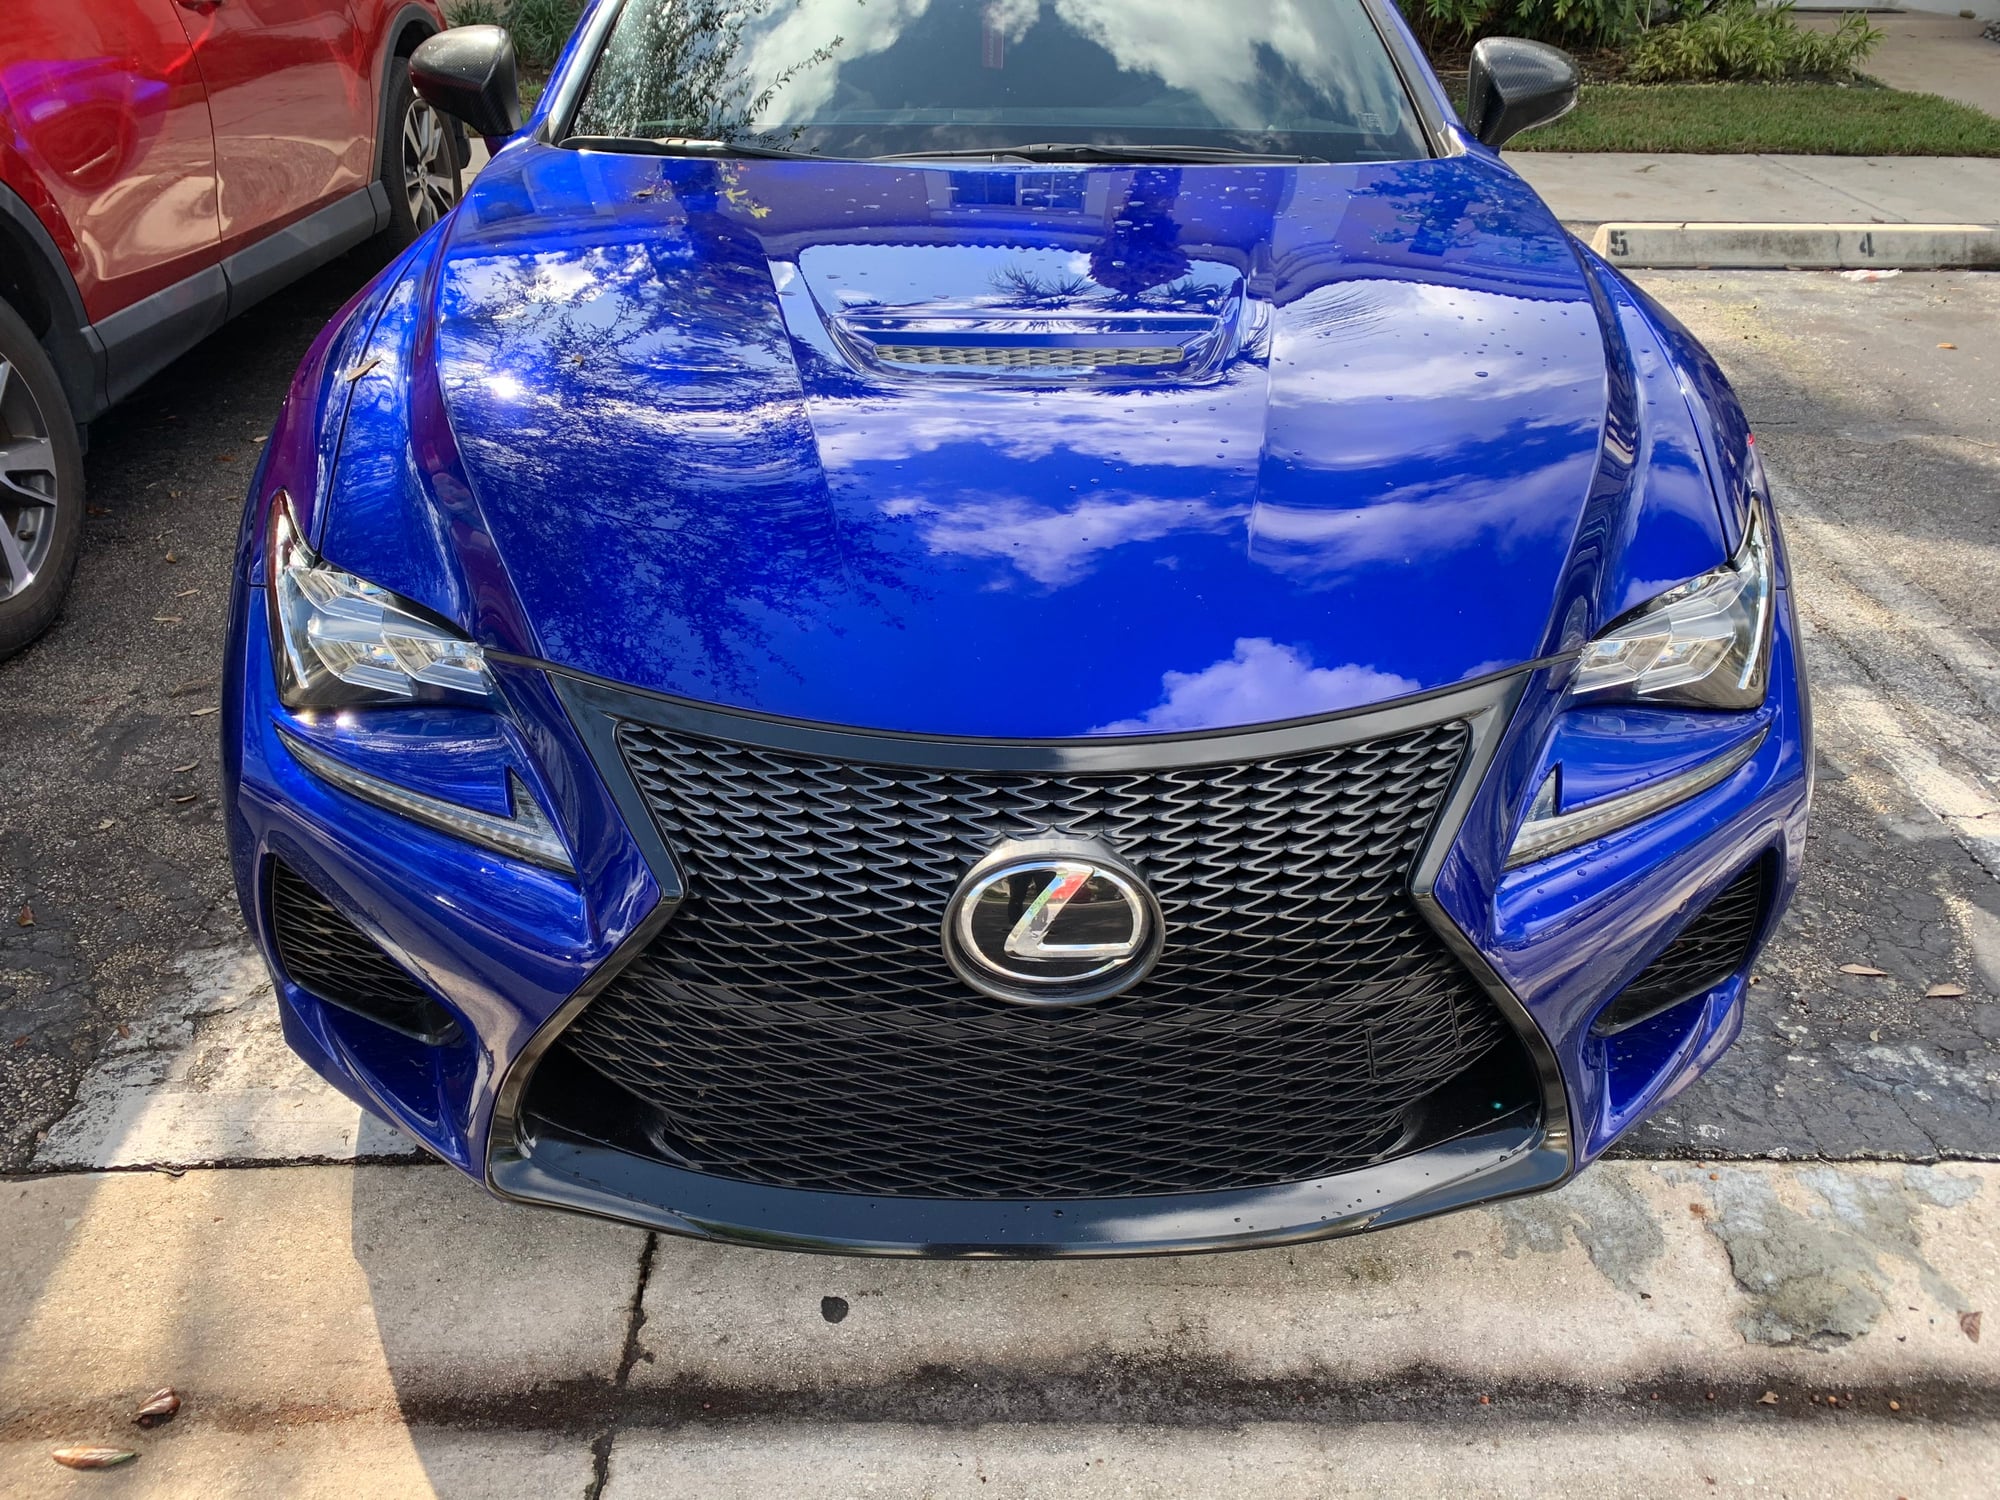 2015 Lexus RC F - 2015 Lexus RCF - Used - VIN Jthhp5bc3f5000751 - 56,000 Miles - Automatic - Coupe - Blue - West Palm Beach, FL 33417, United States